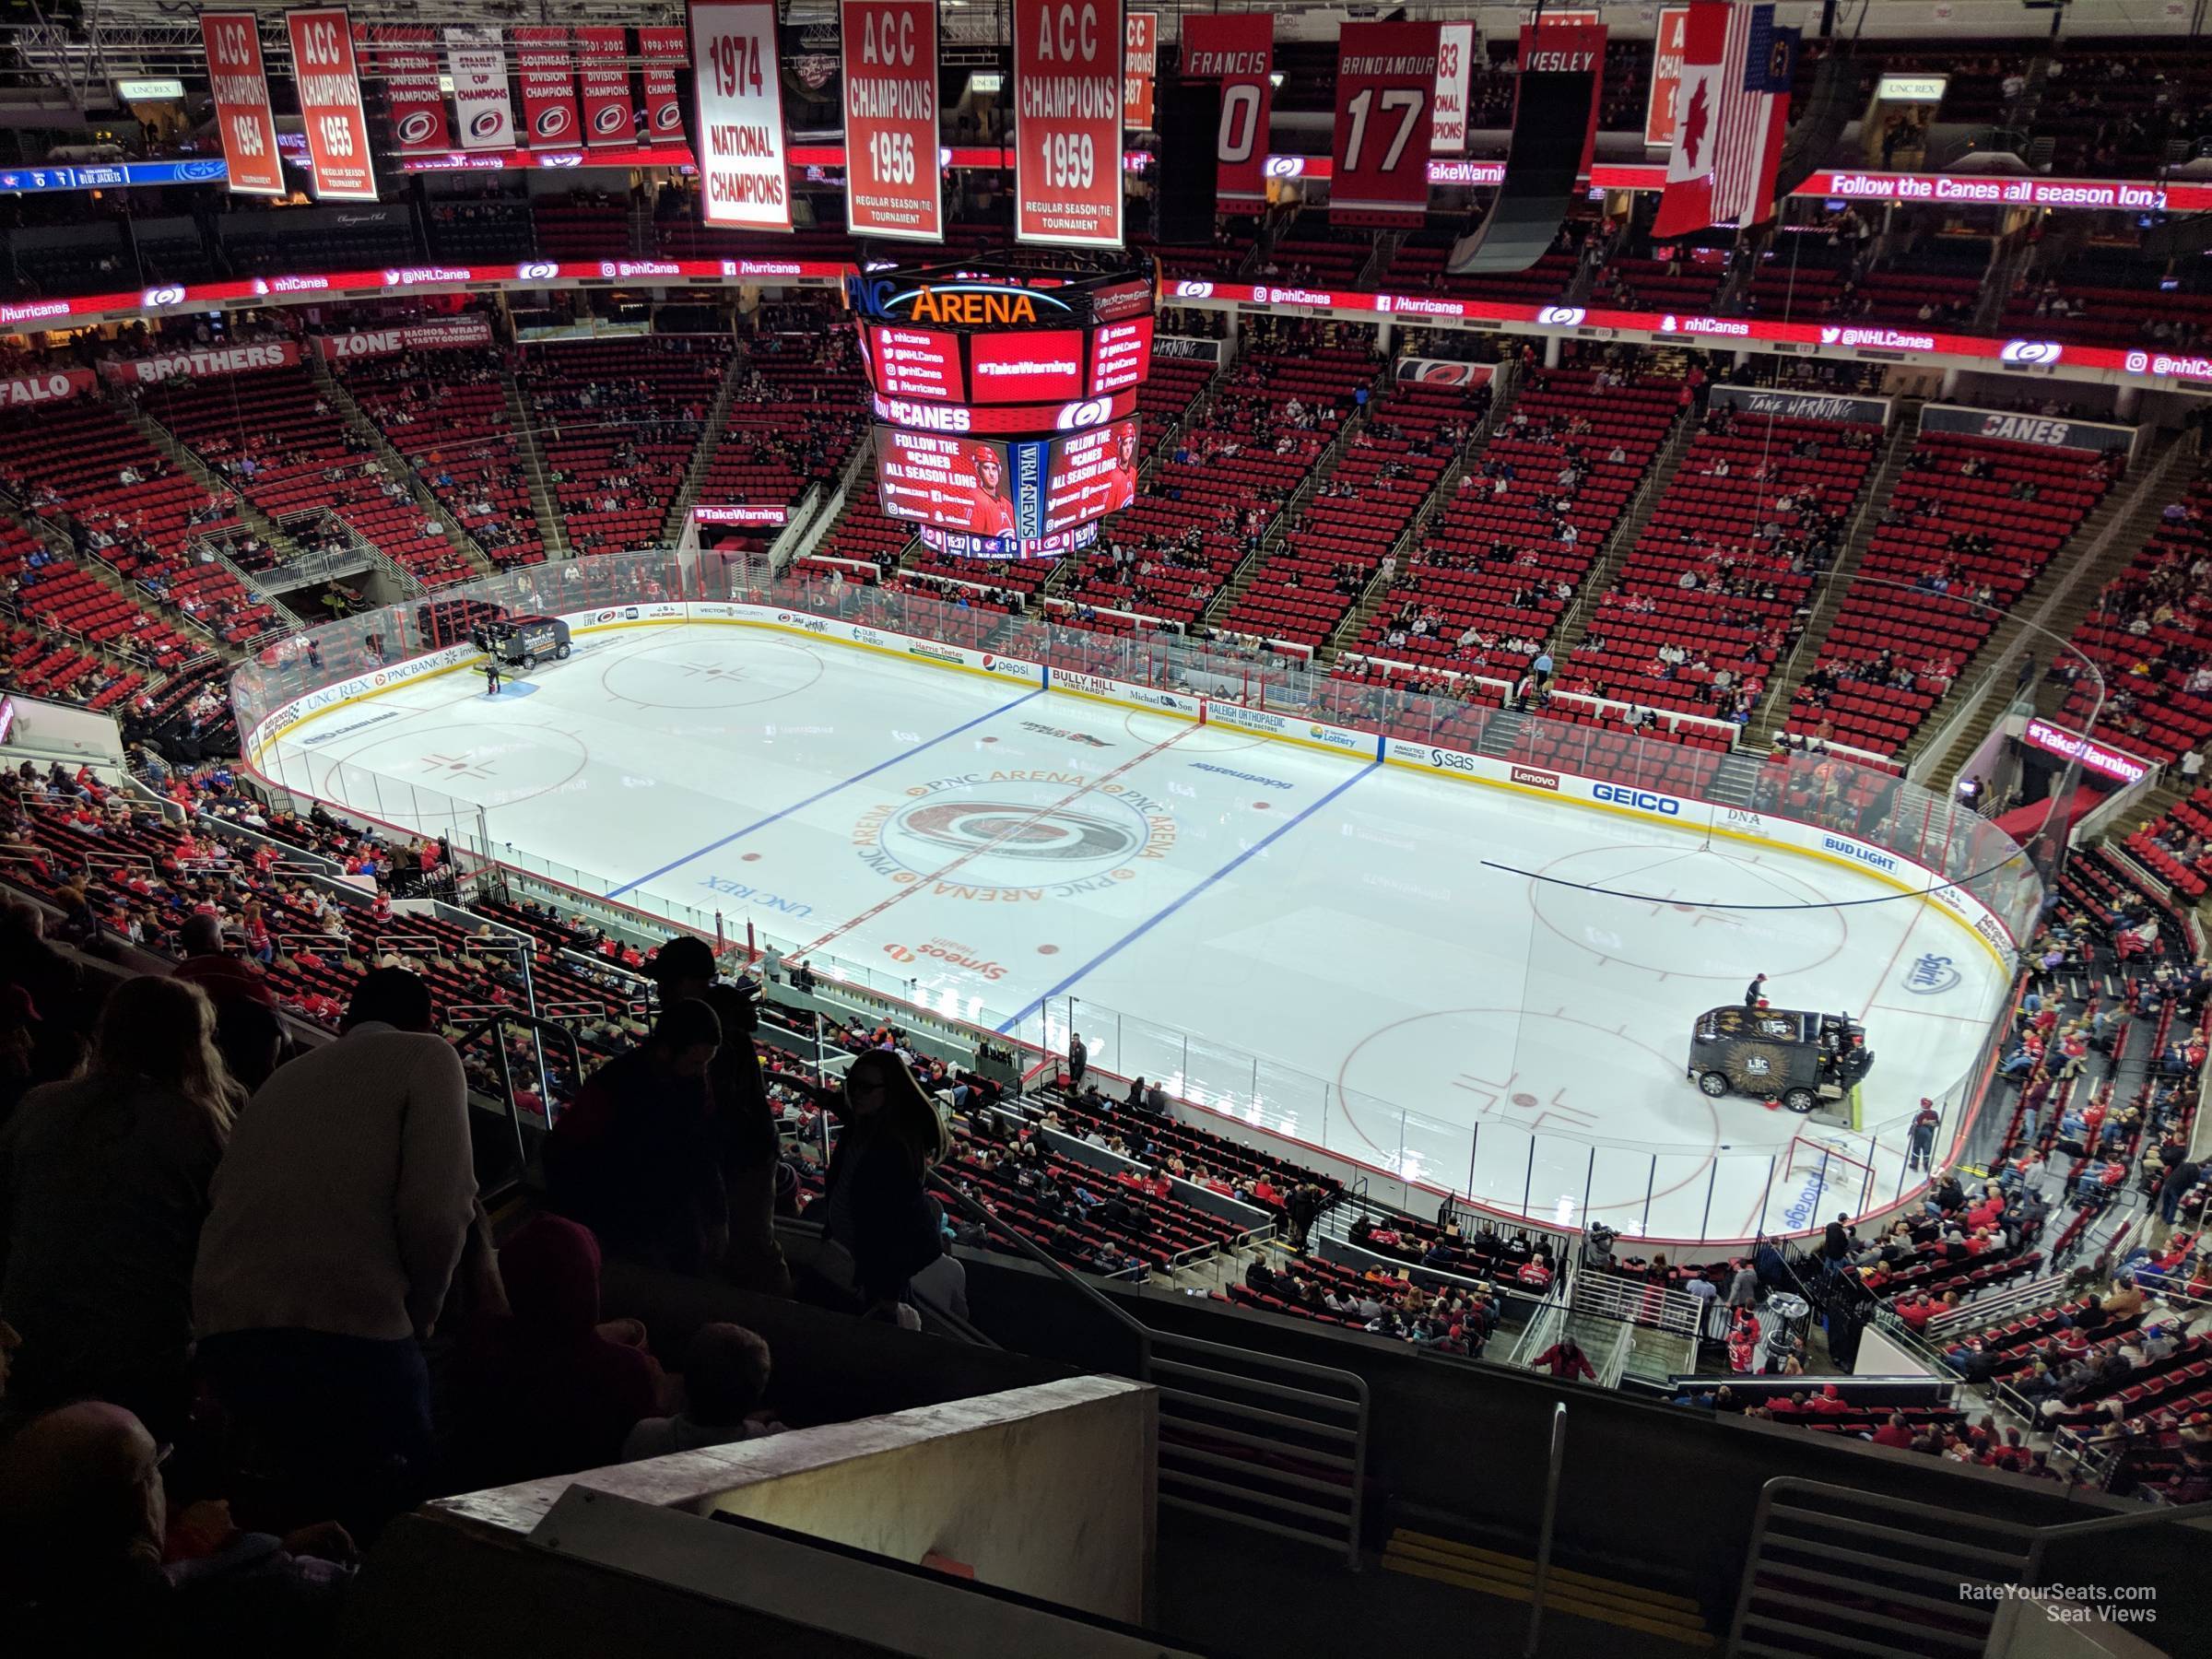 section 301, row h seat view  for hockey - pnc arena